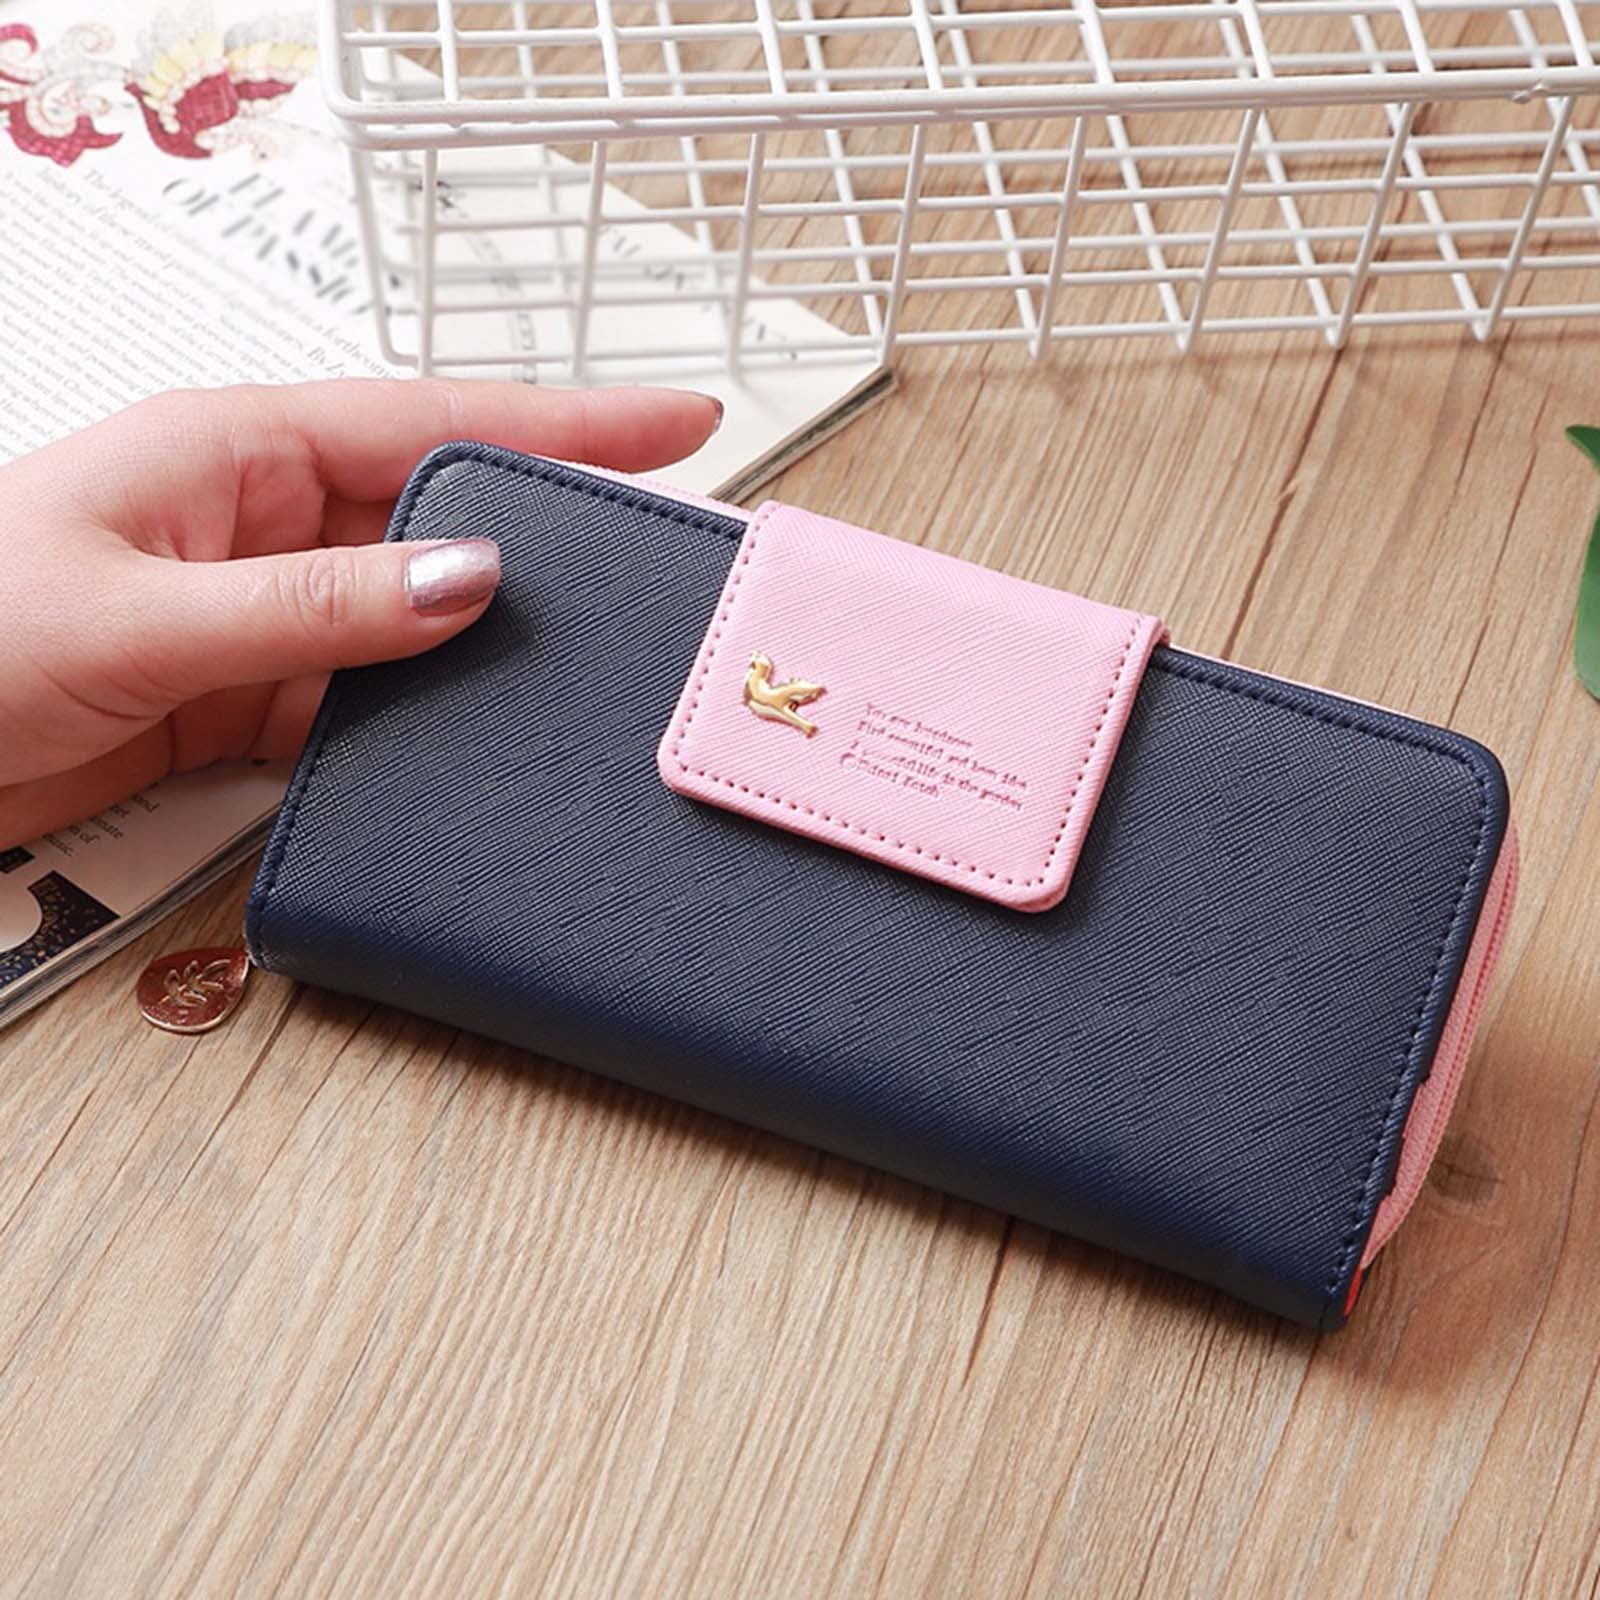 New Women's Colorful Clutch Bag For Party Wear And Casual Use Handbag Gift  Item | eBay